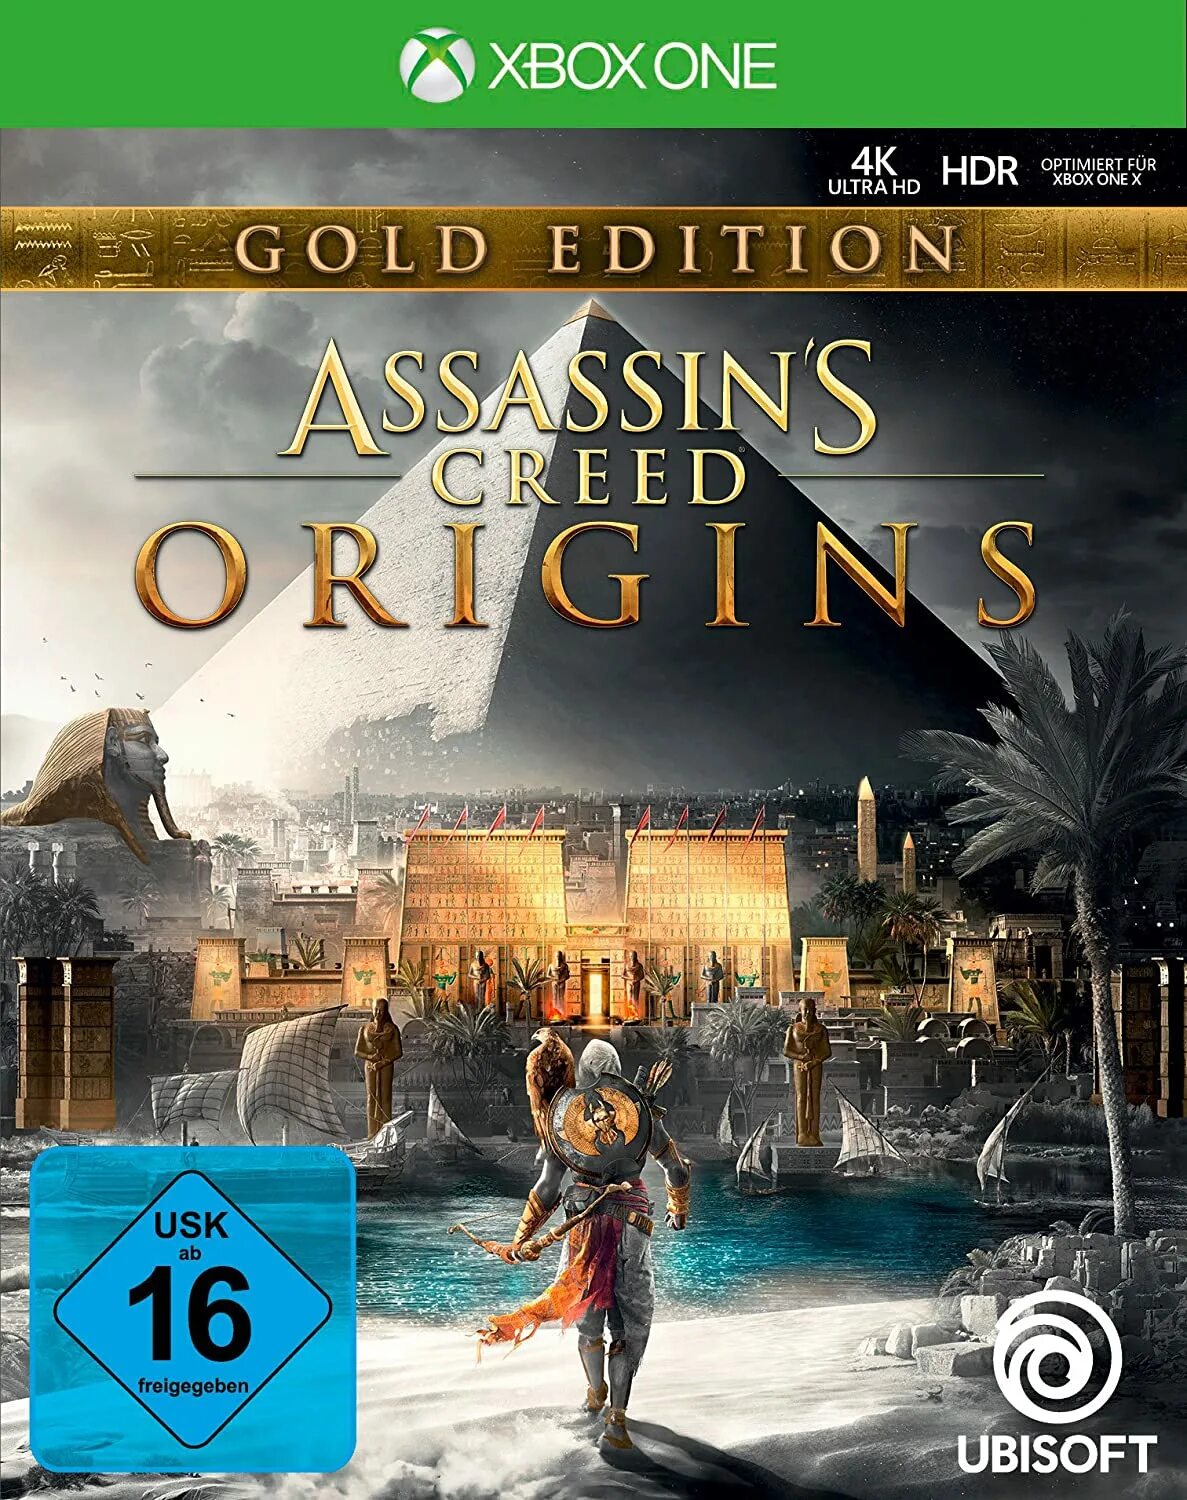 Assassin's Creed® Origins - Gold Edition Xbox. Assassin's Creed Origins ps4. Assassin's Creed Origins Xbox 360. Ps4 Gold Edition.